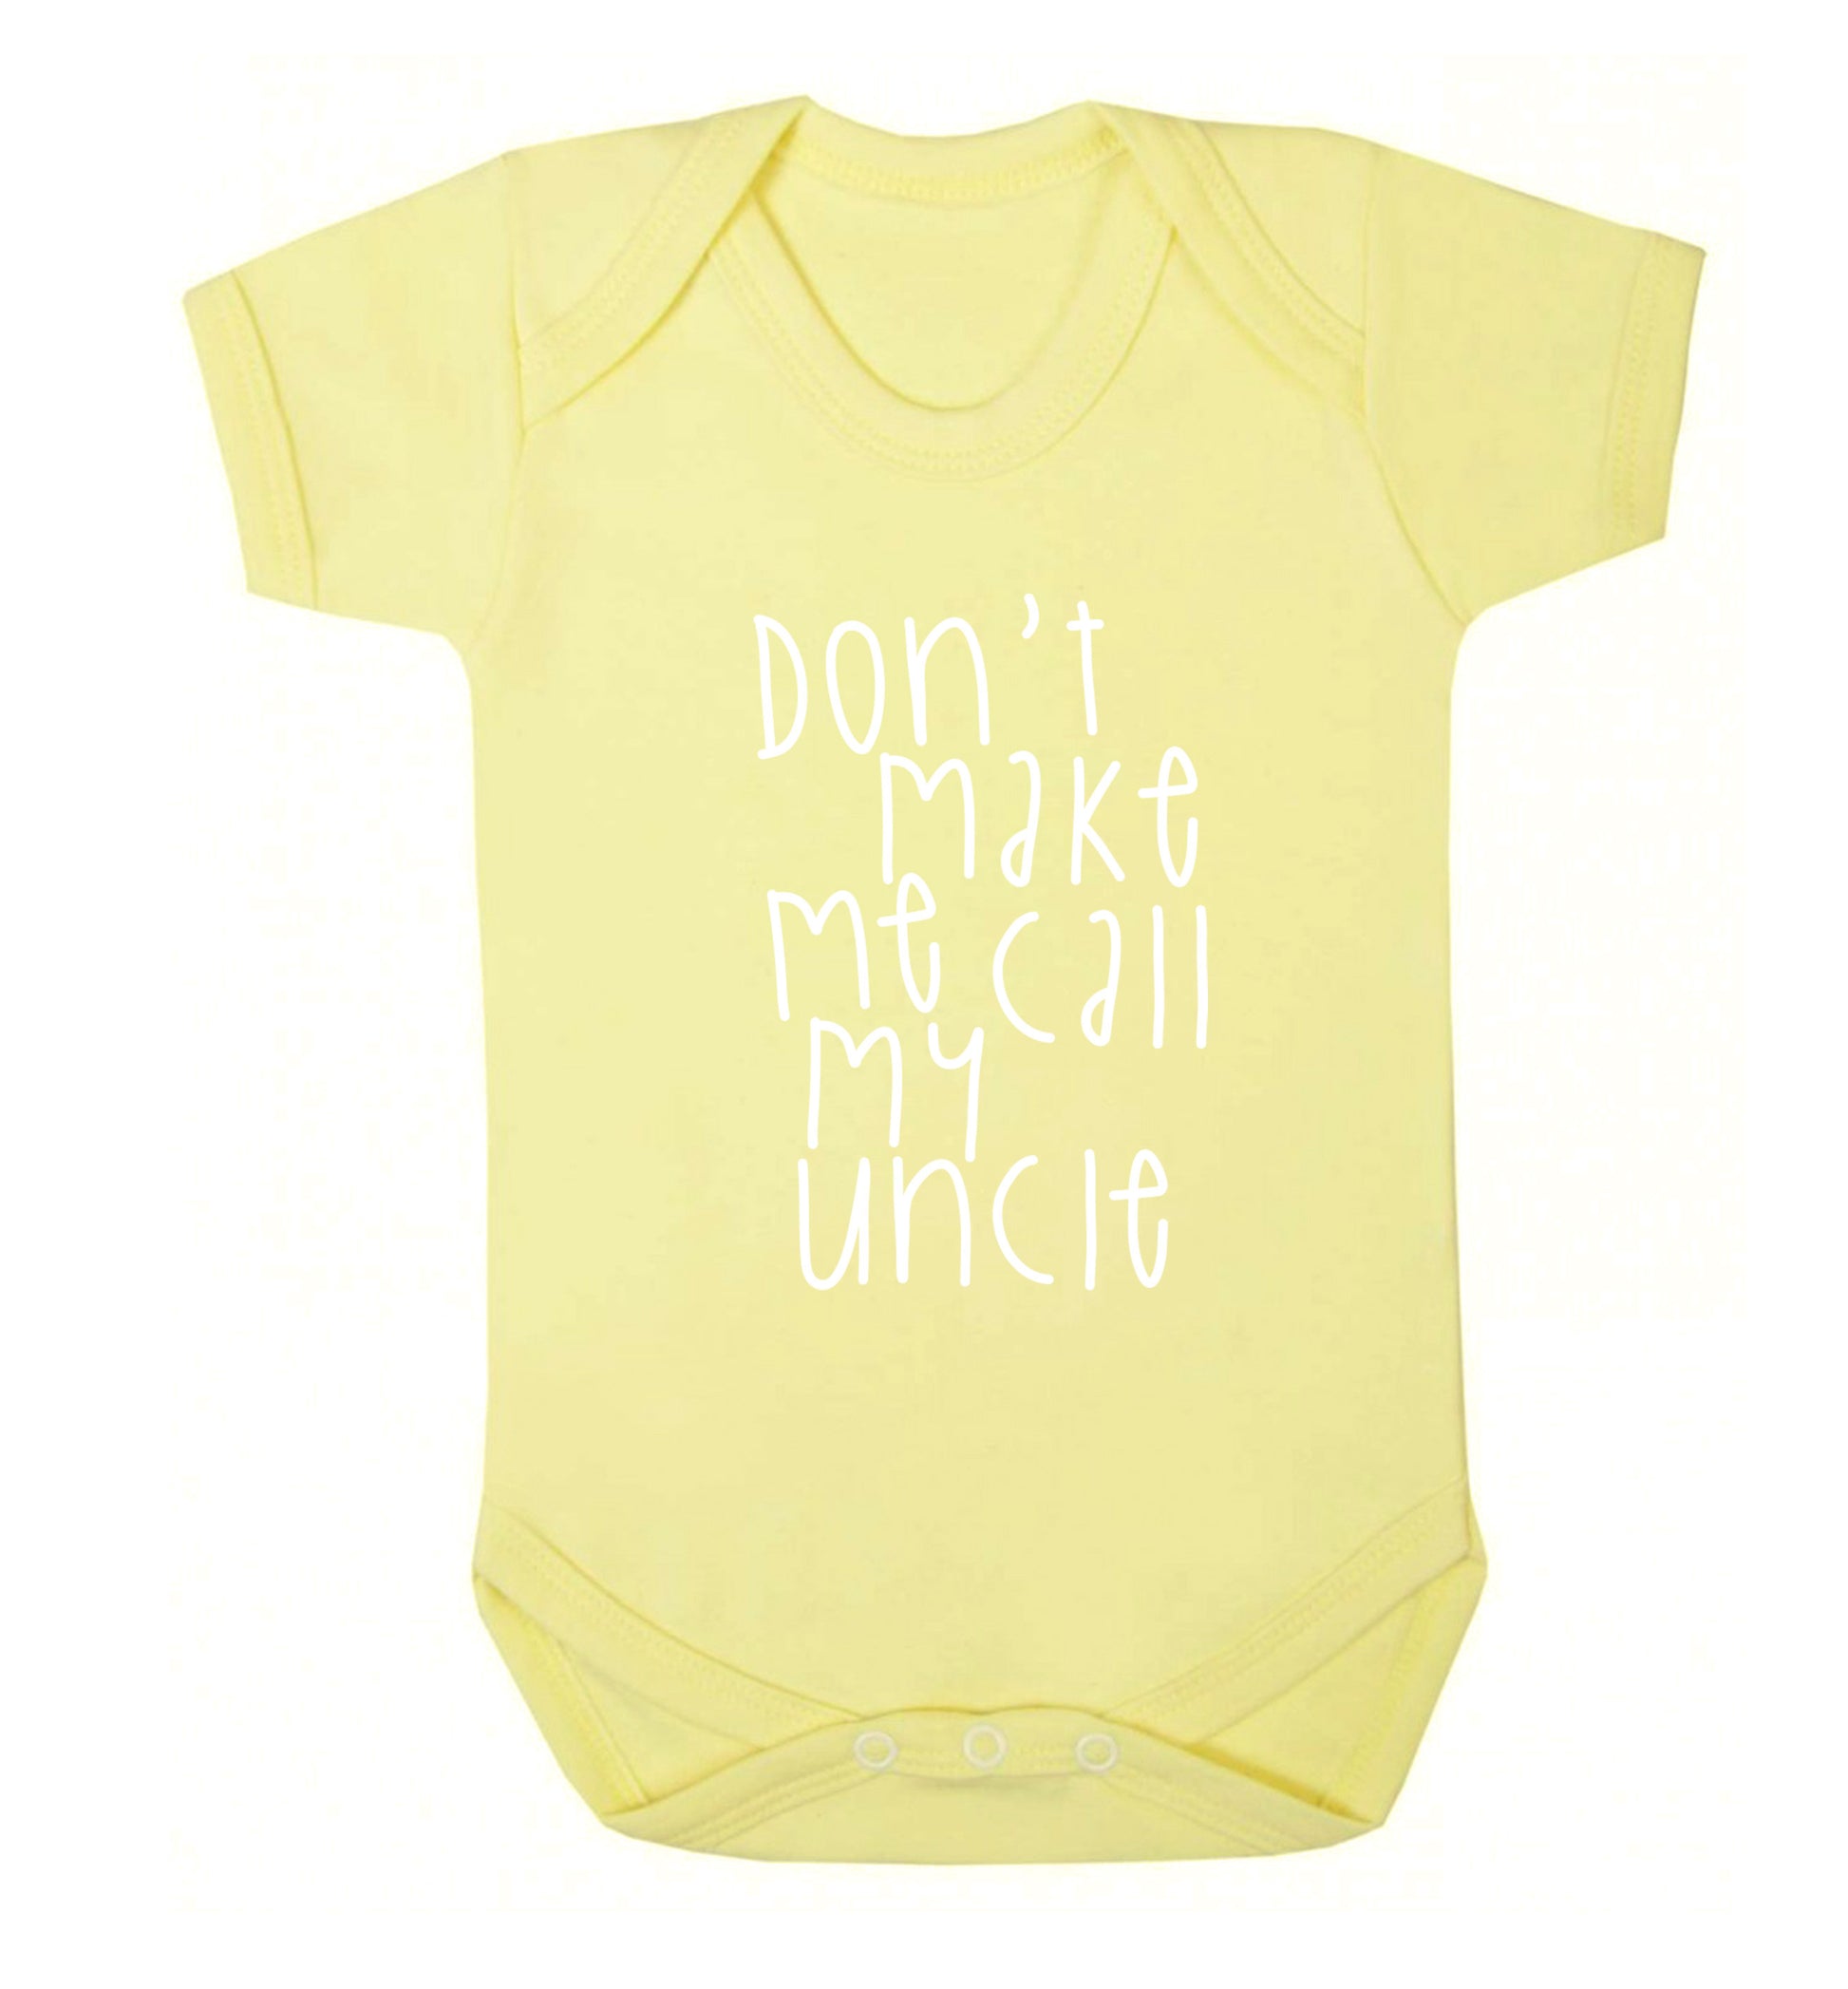 Don't make me call my uncle Baby Vest pale yellow 18-24 months